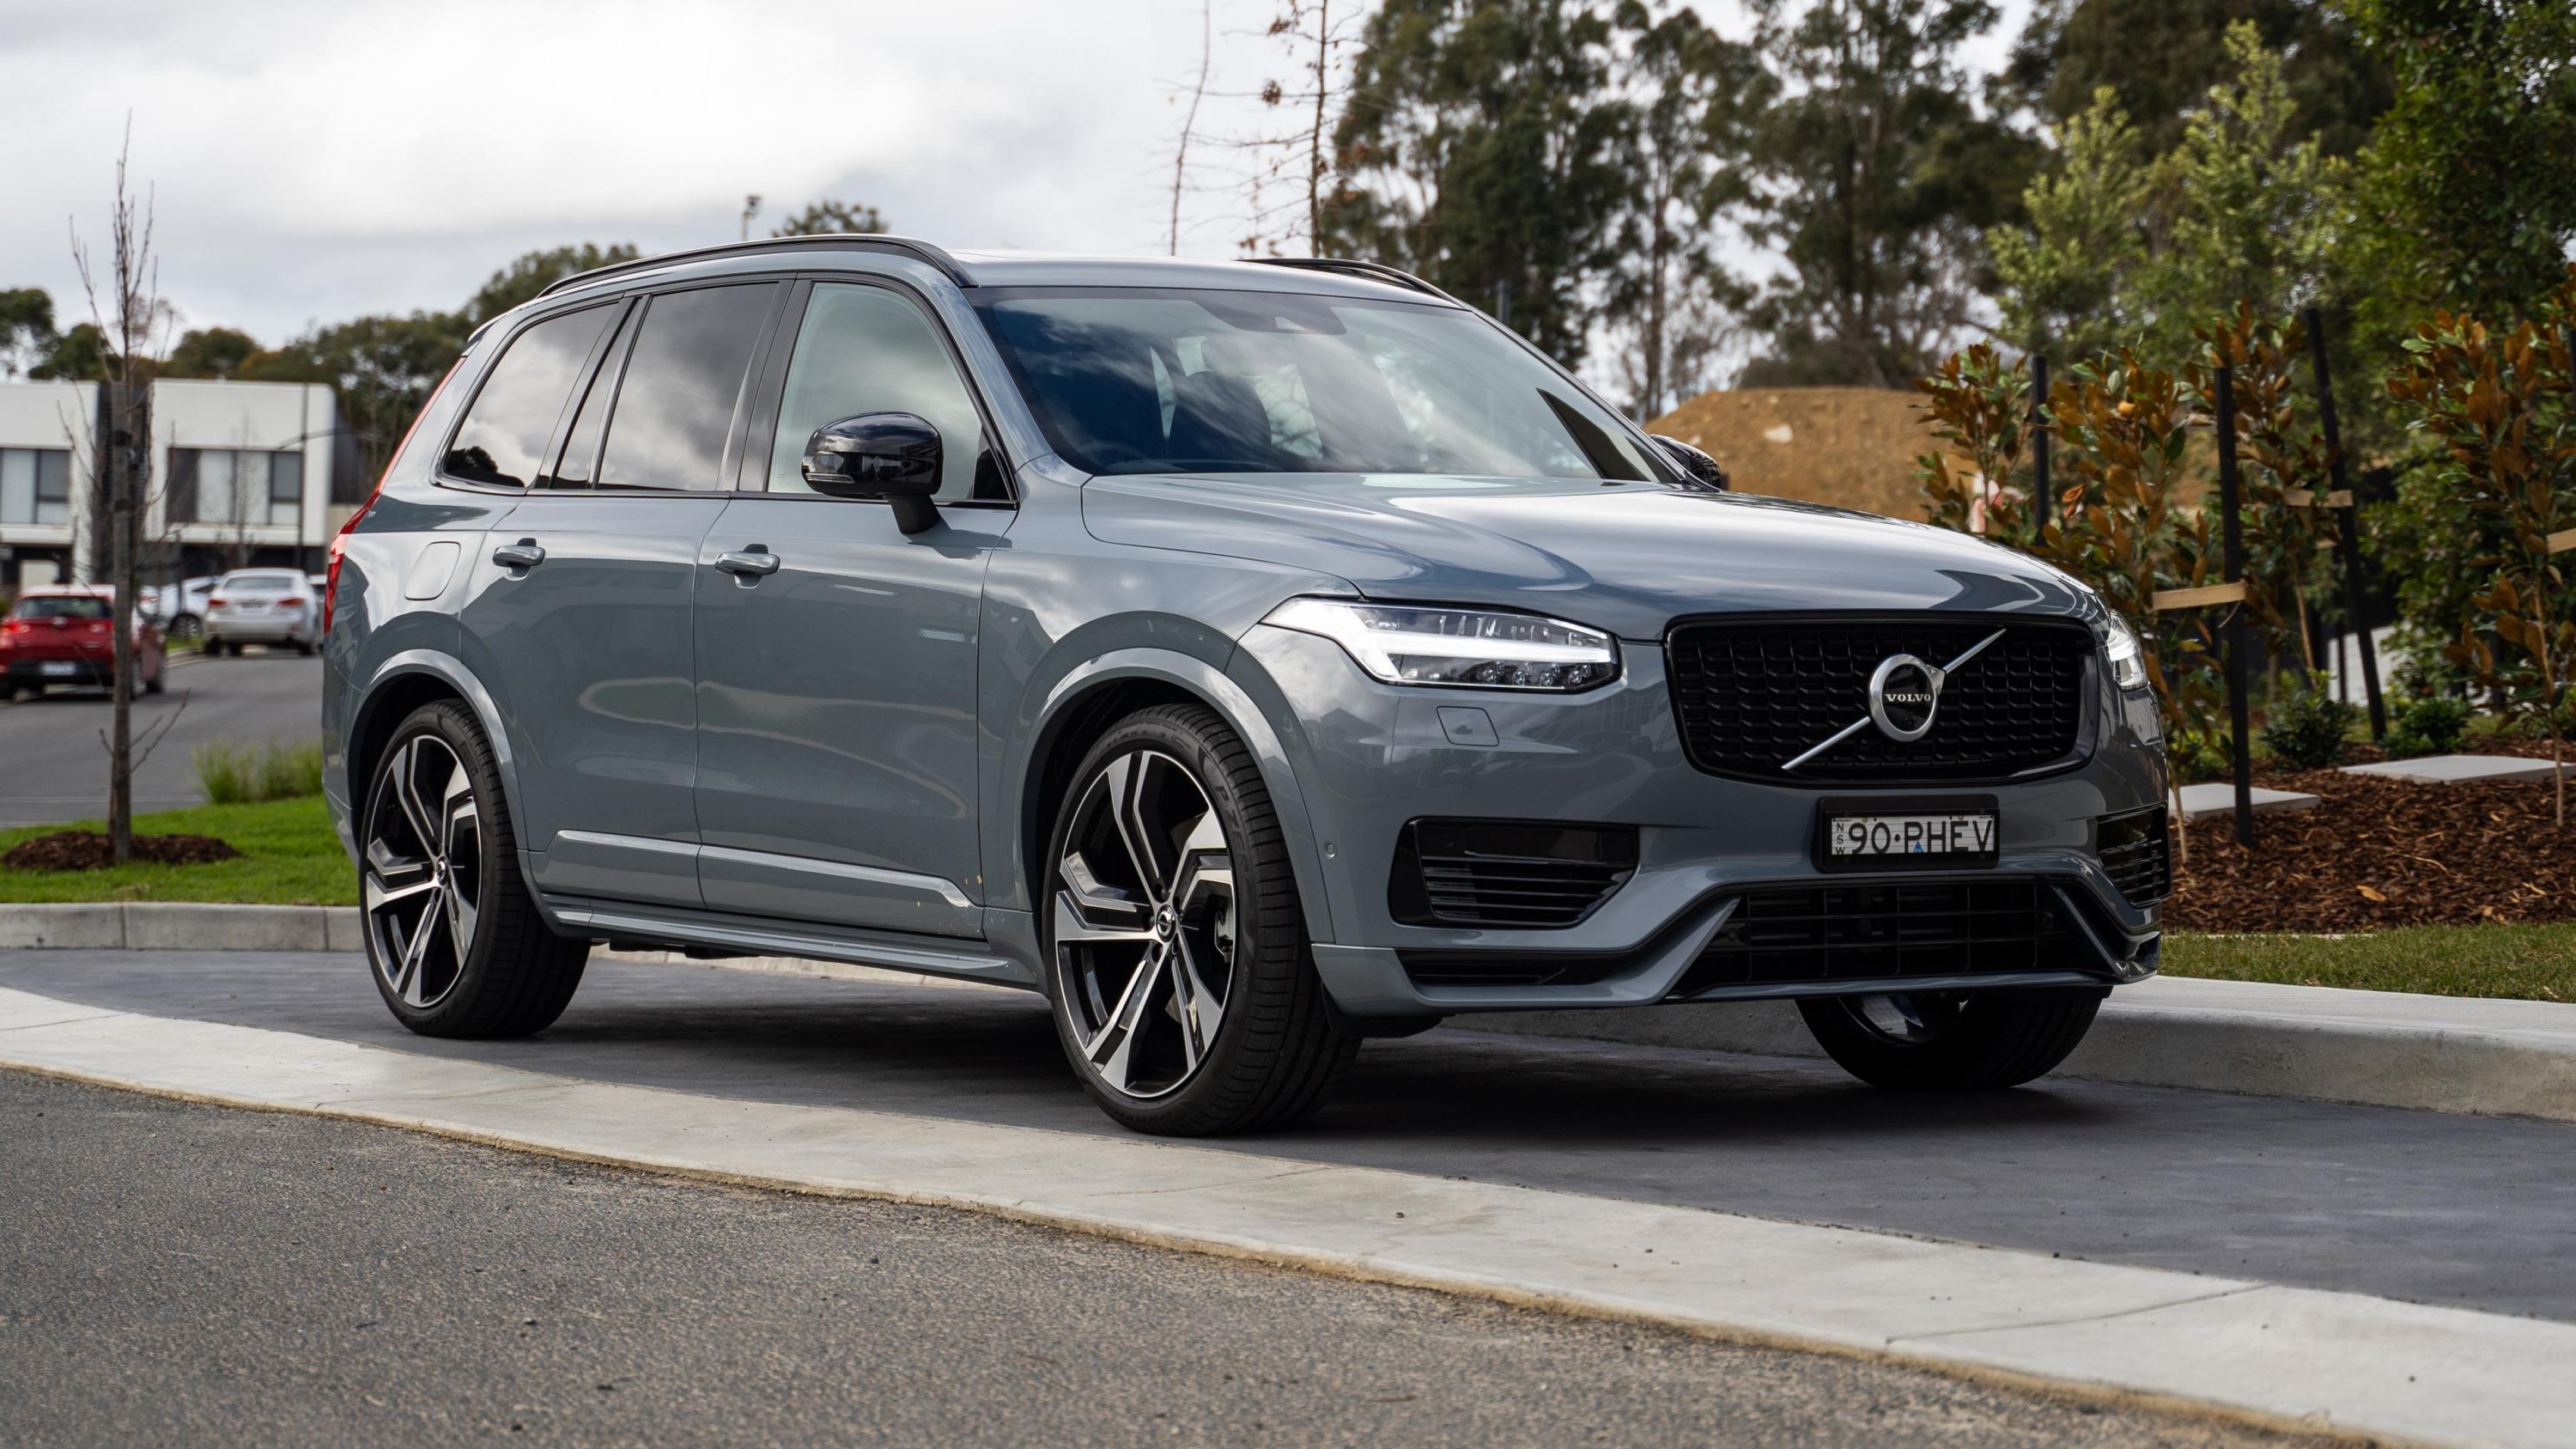 Discover 114+ images volvo xc90 comparable cars - In.thptnganamst.edu.vn